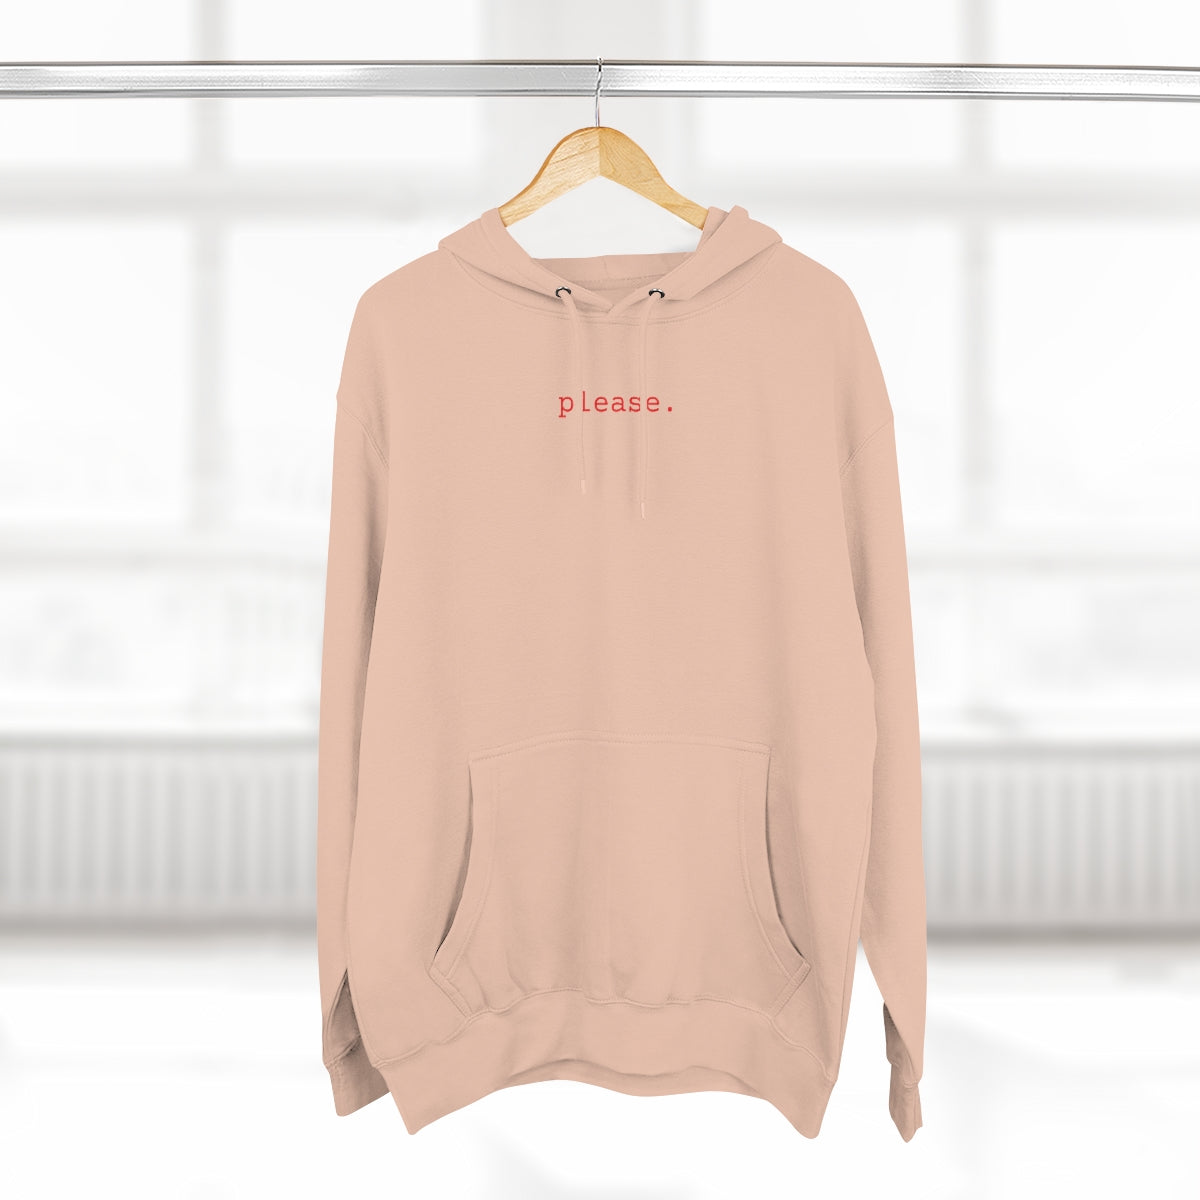 Afters Ruined My Life Hoodie (Please)